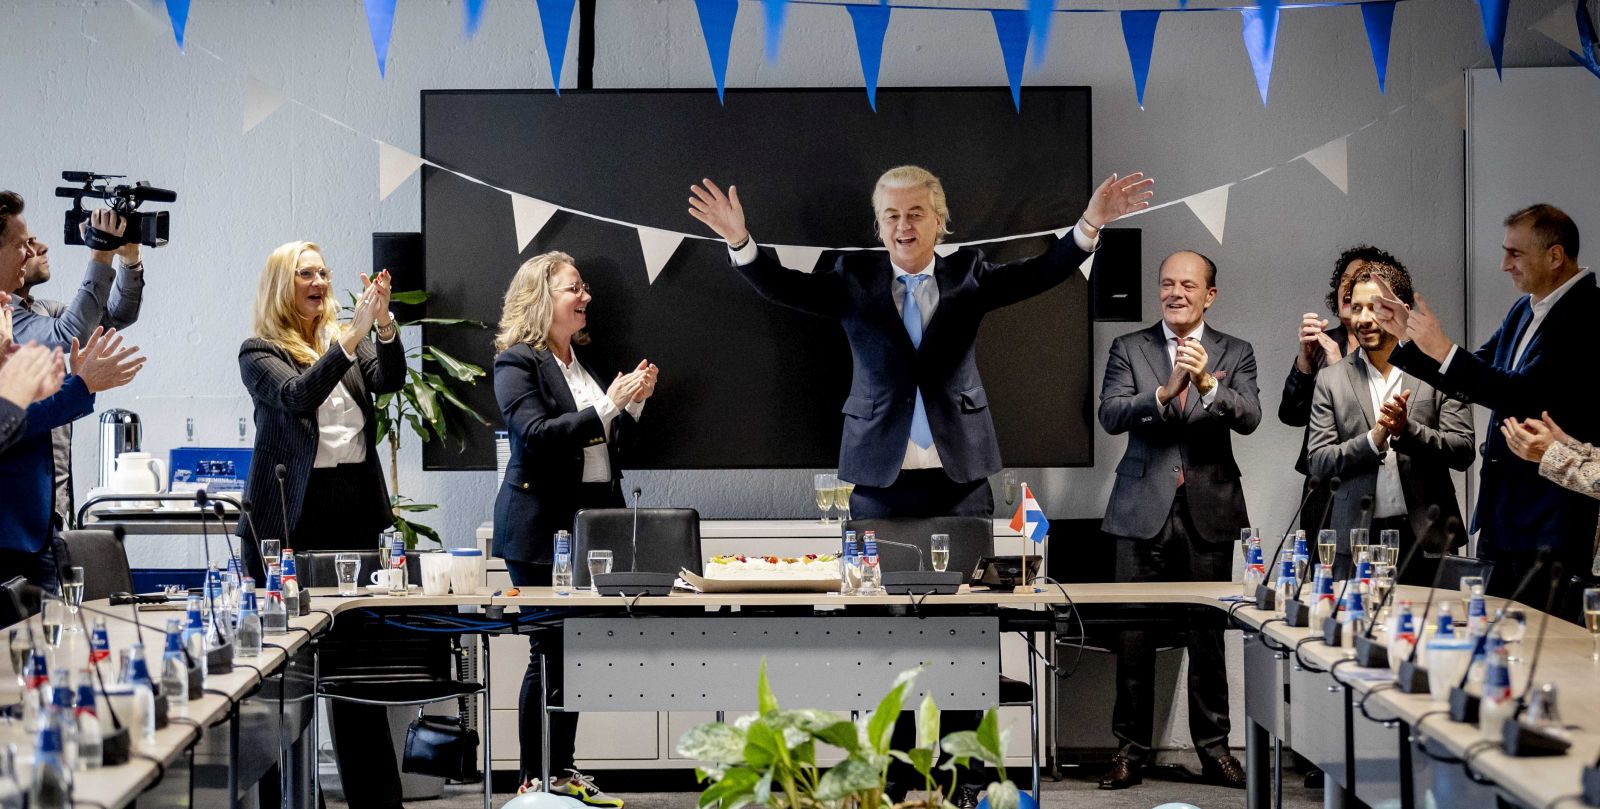 epa10990601 Leader of Freedom party (PVV) Geert Wilders (C-R) gestures next to Dutch MP Fleur Agema (C-L) one day after the House of Representatives elections, The Hague, Netherlands, 23 November 2023. Wilders believes that the PVV can no longer be ignored after the "mega victory" in the House of Representatives elections. He calls on other parties to work together and step over their own shadows. The PVV party is set to win the parliamentary elections with 37 seats after most votes were counted.  EPA/REMKO DE WAAL